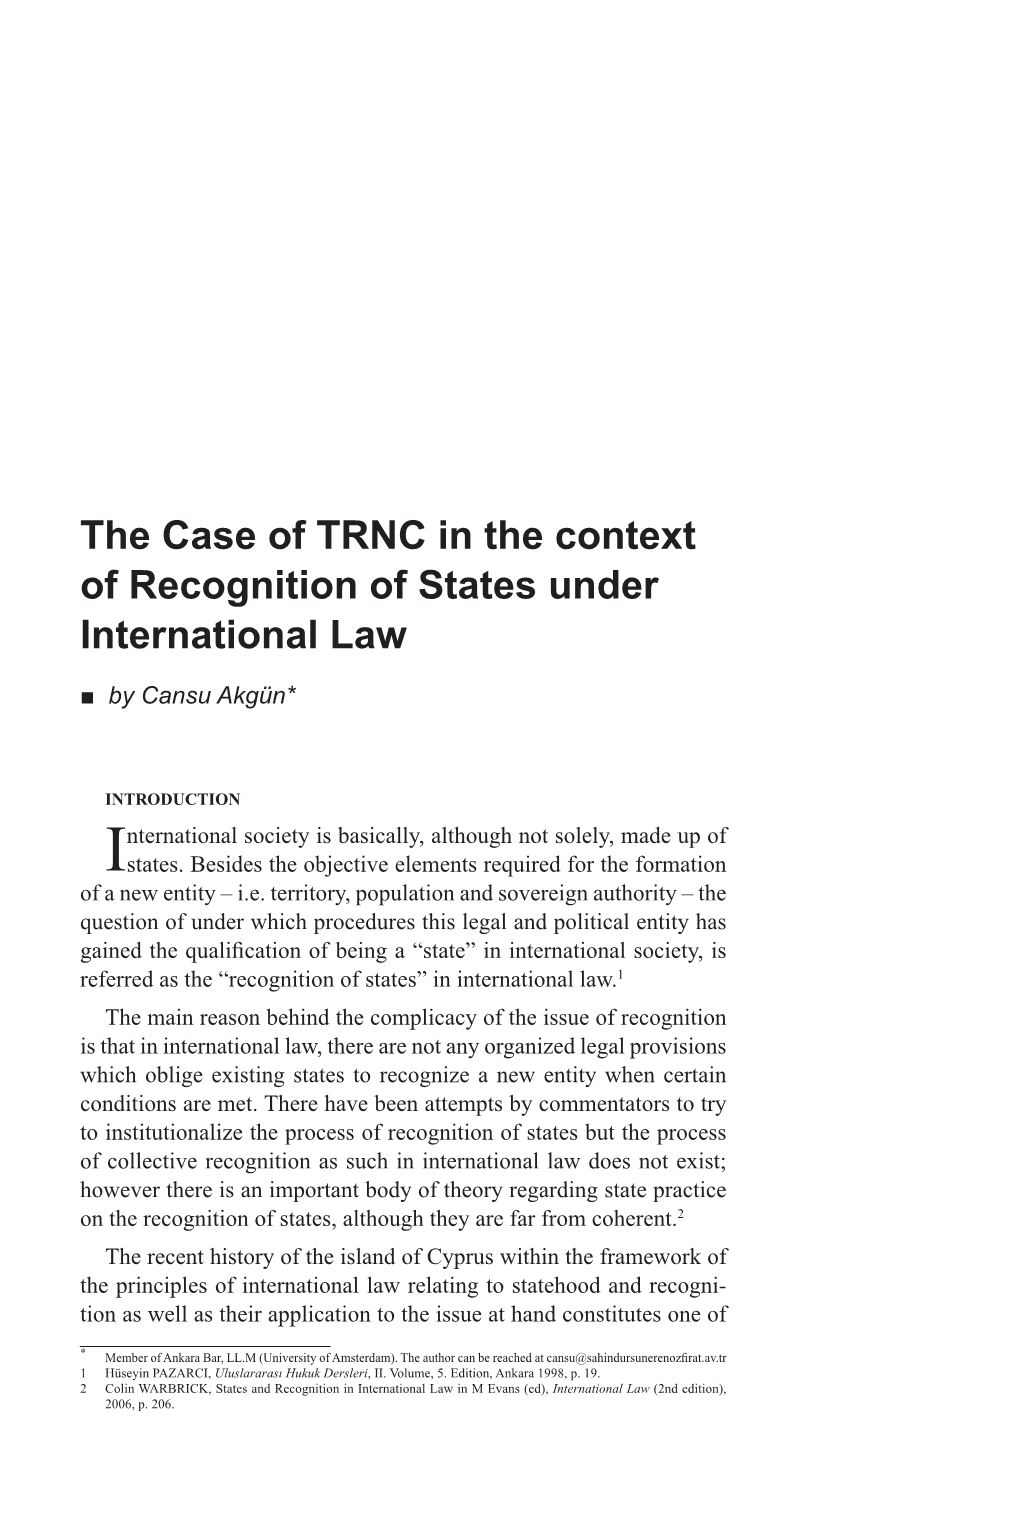 The Case of TRNC in the Context of Recognition of States Under International Law ■ by Cansu Akgün*